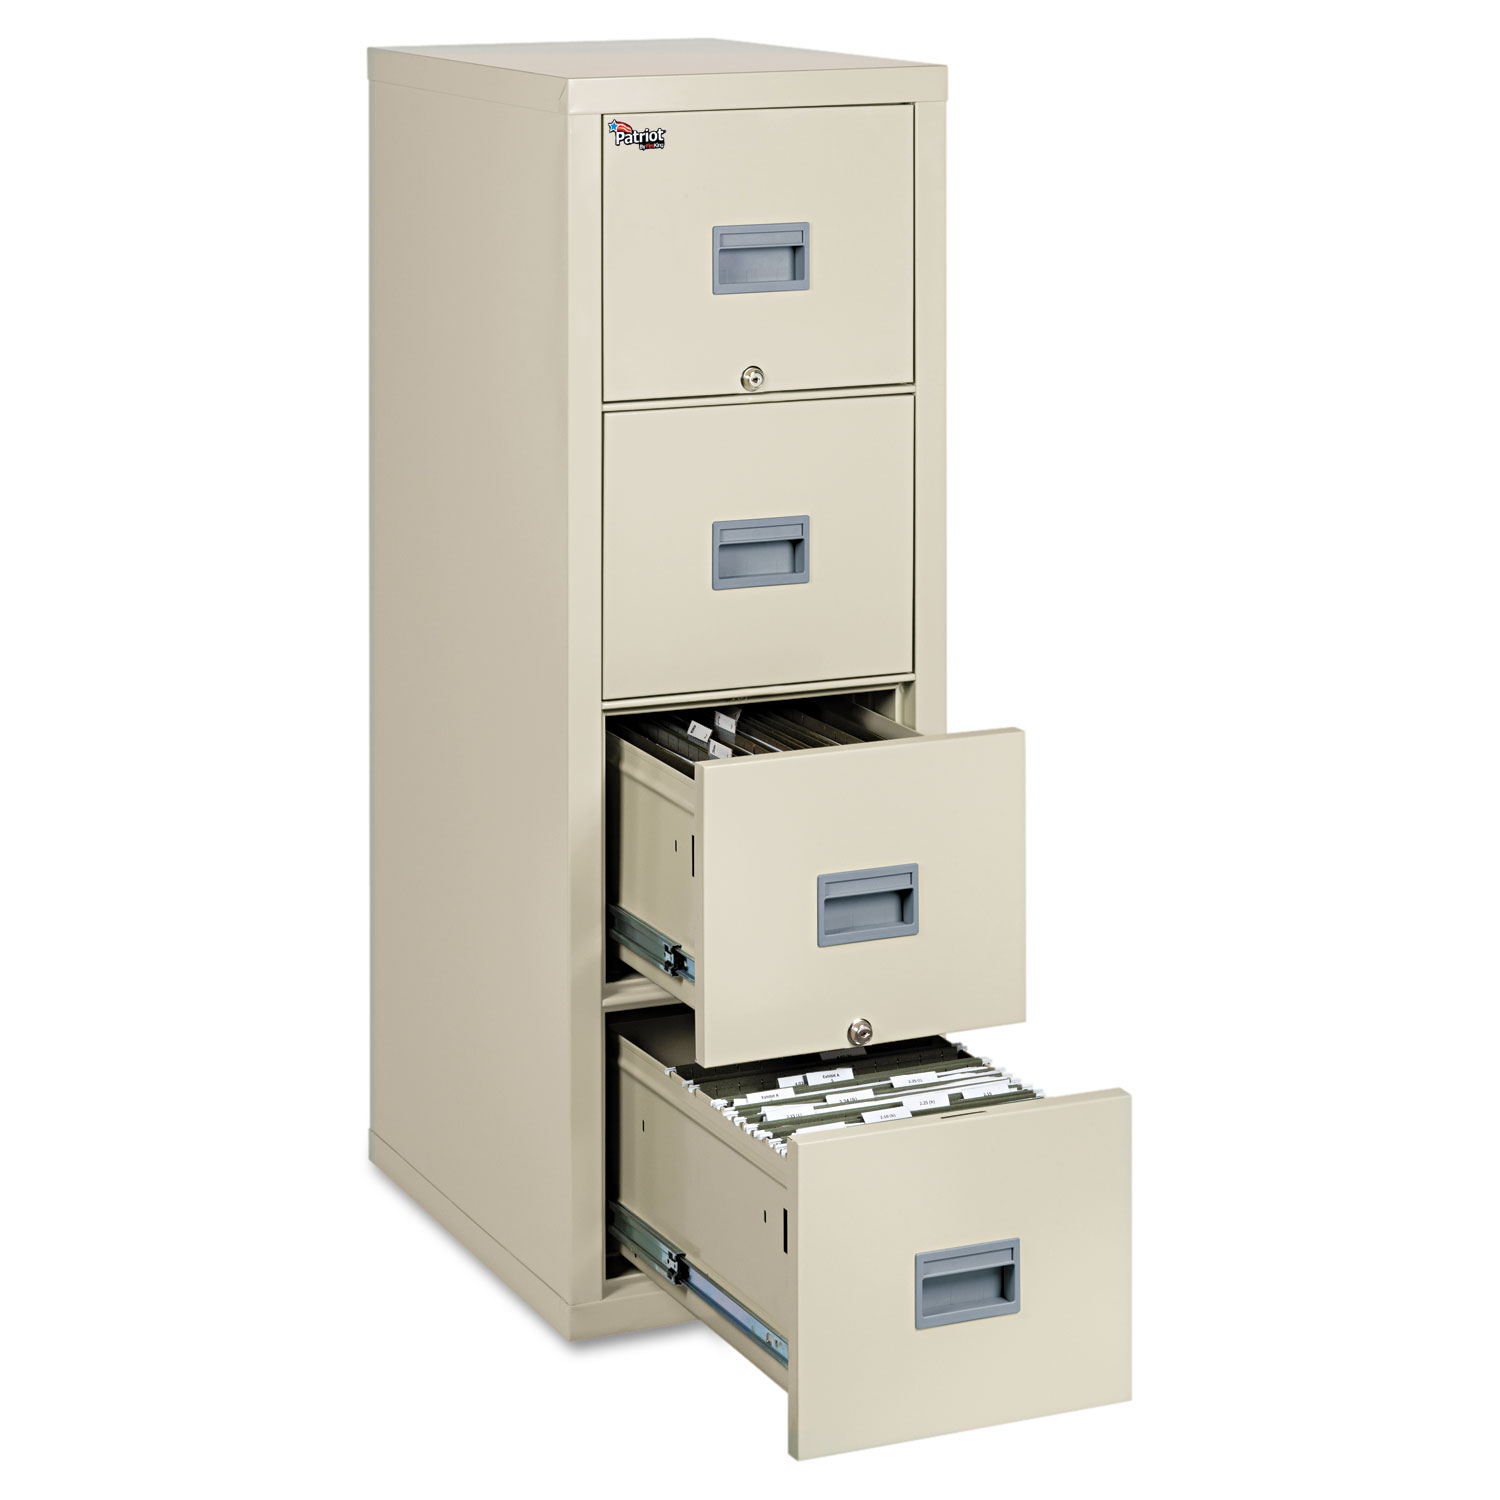 FireKing Patriot Insulated Four-Drawer Fire File, 17-3/4w x 25d x 52-3/4h, Parchment